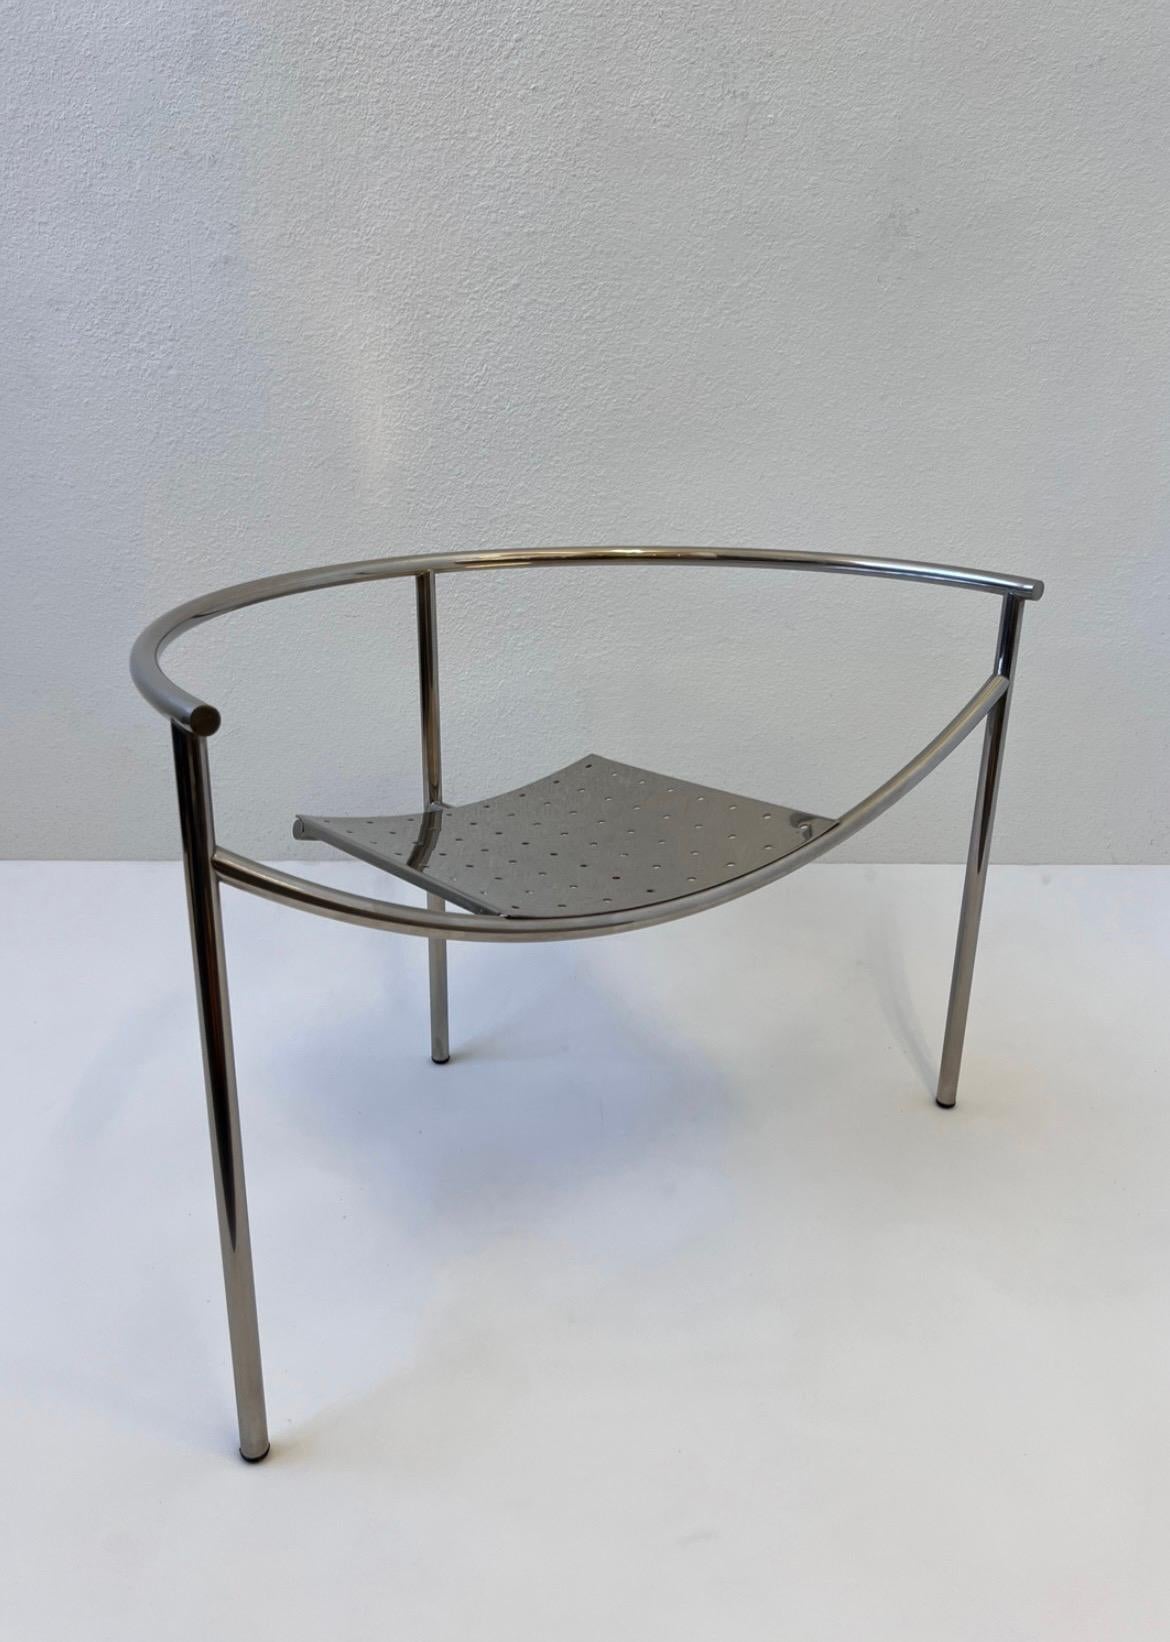 Post-Moder Polish Nickel Tripod “Dr Sonderbar” Lounge Chair by renowned French designer Philippe Starck. 

I great vintage condition shows minor wear consistent with age. 